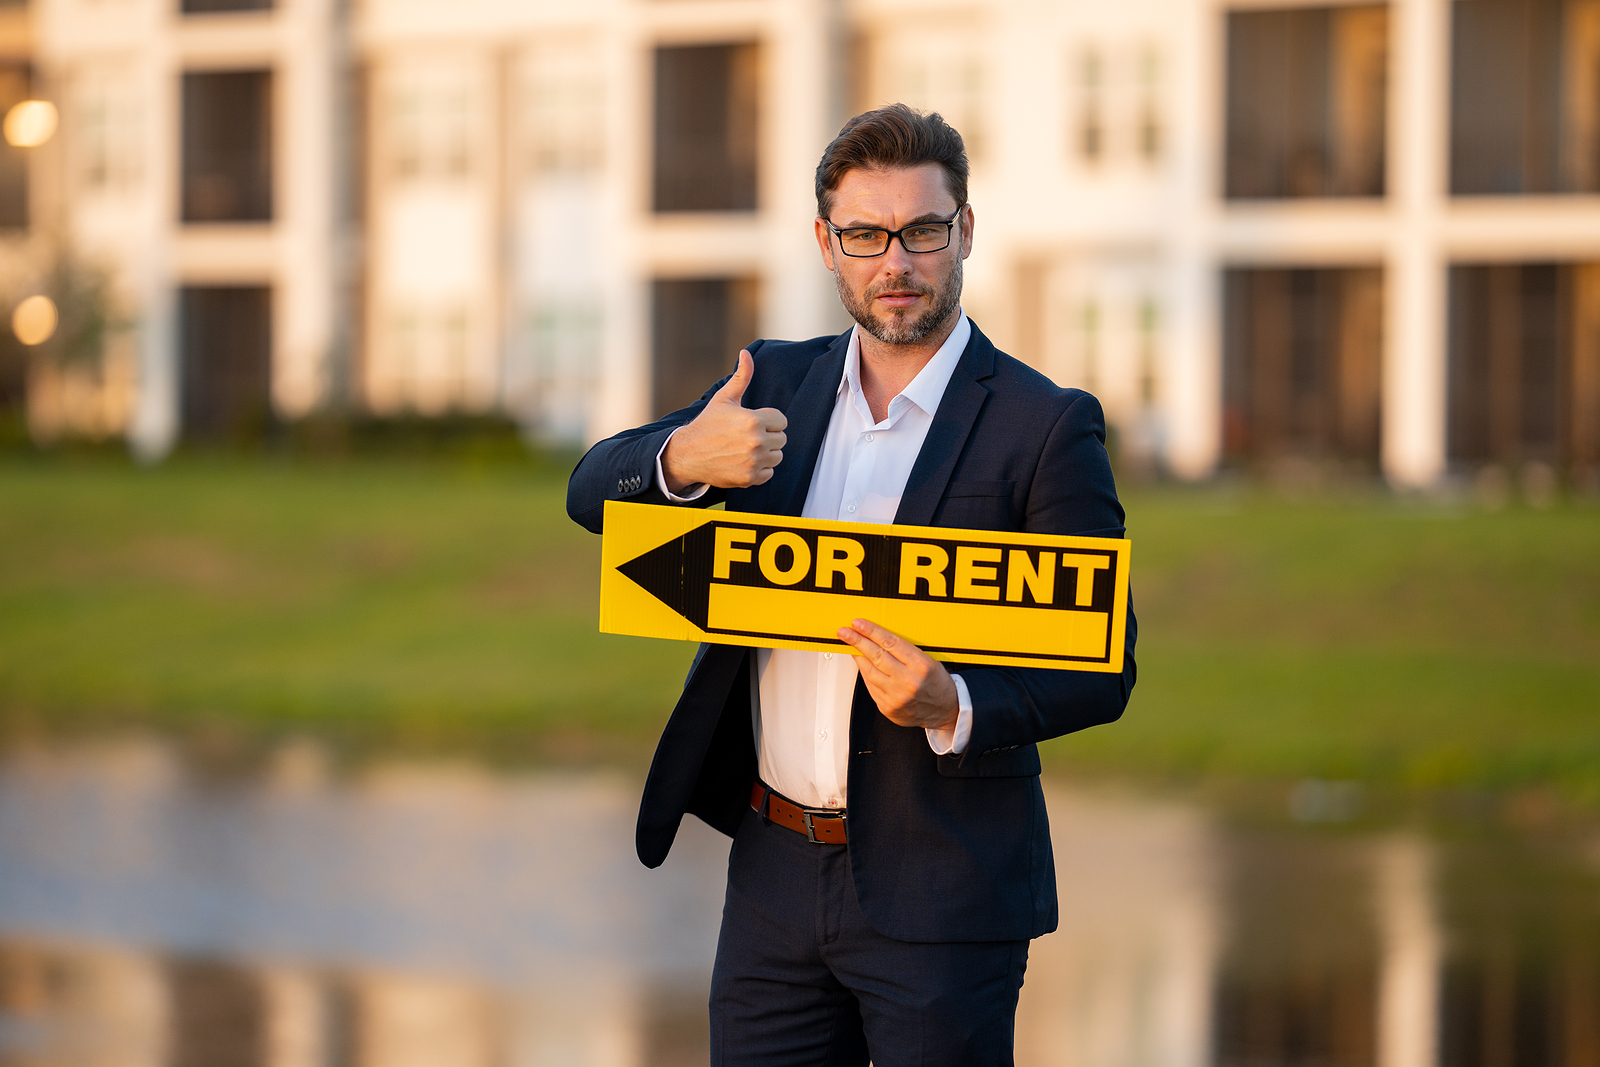 5 Things to consider before becoming a landlord: What they dont tell you